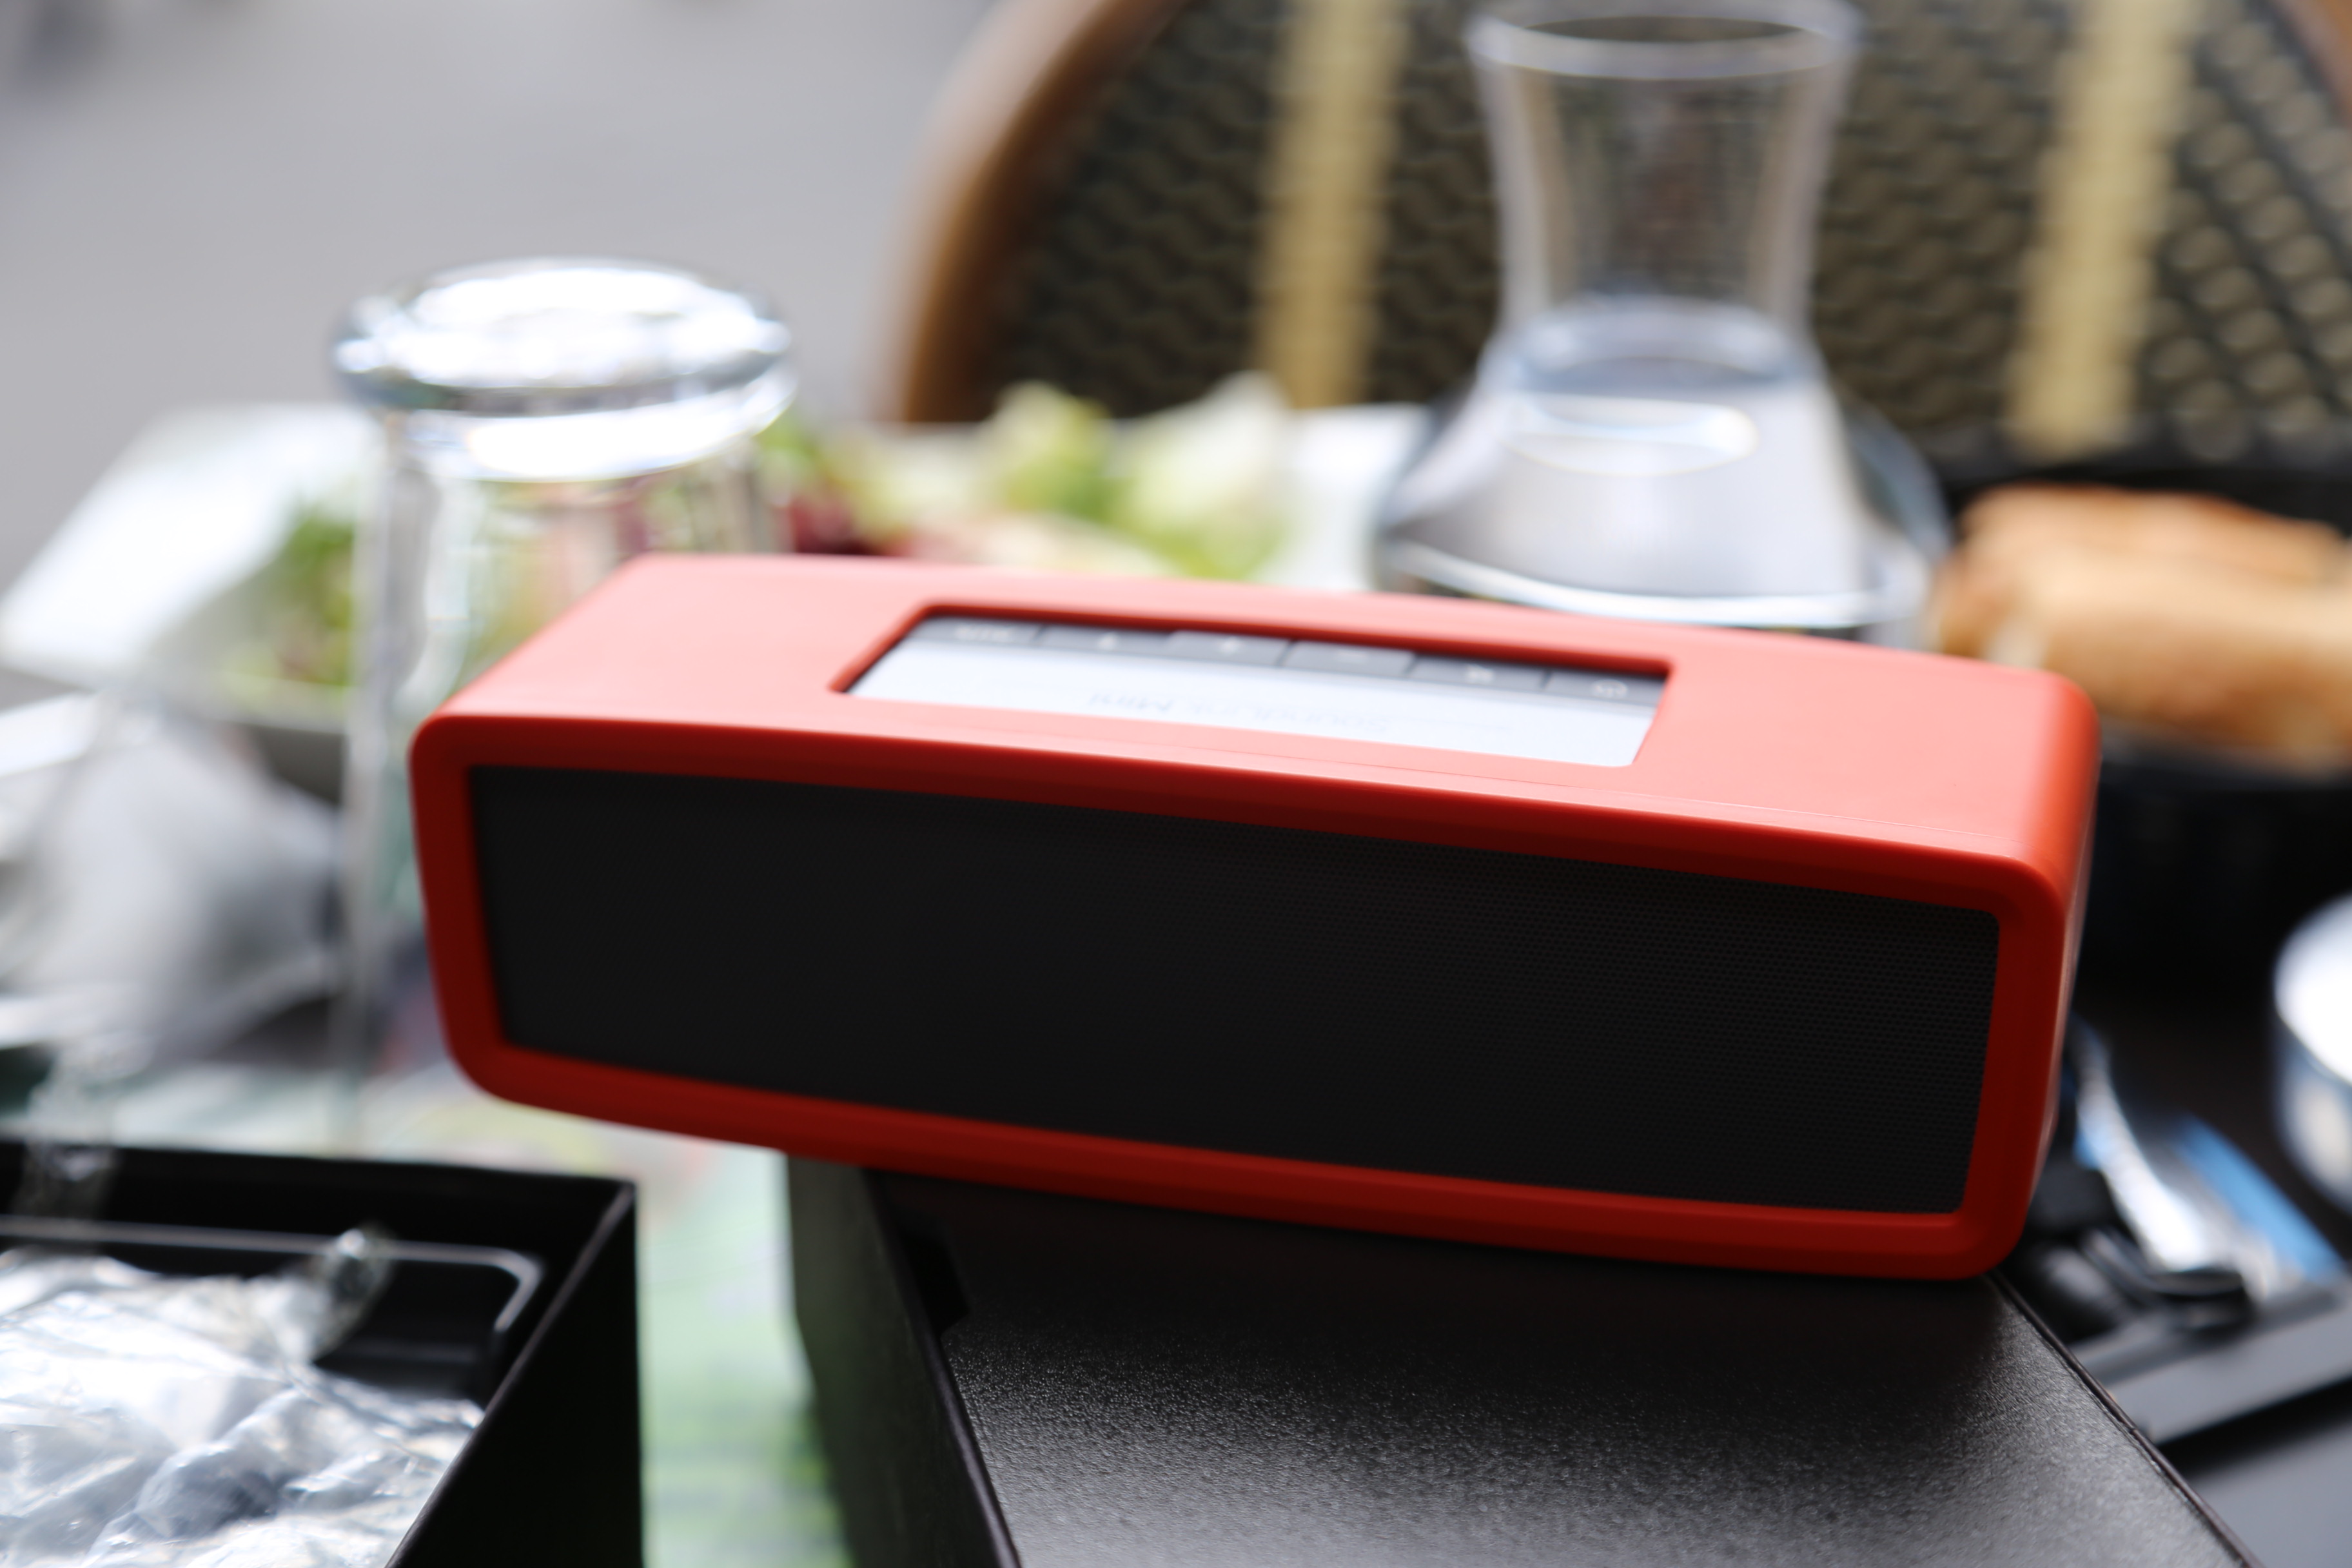 Review: The Bose SoundLink Mini is the best sounding portable